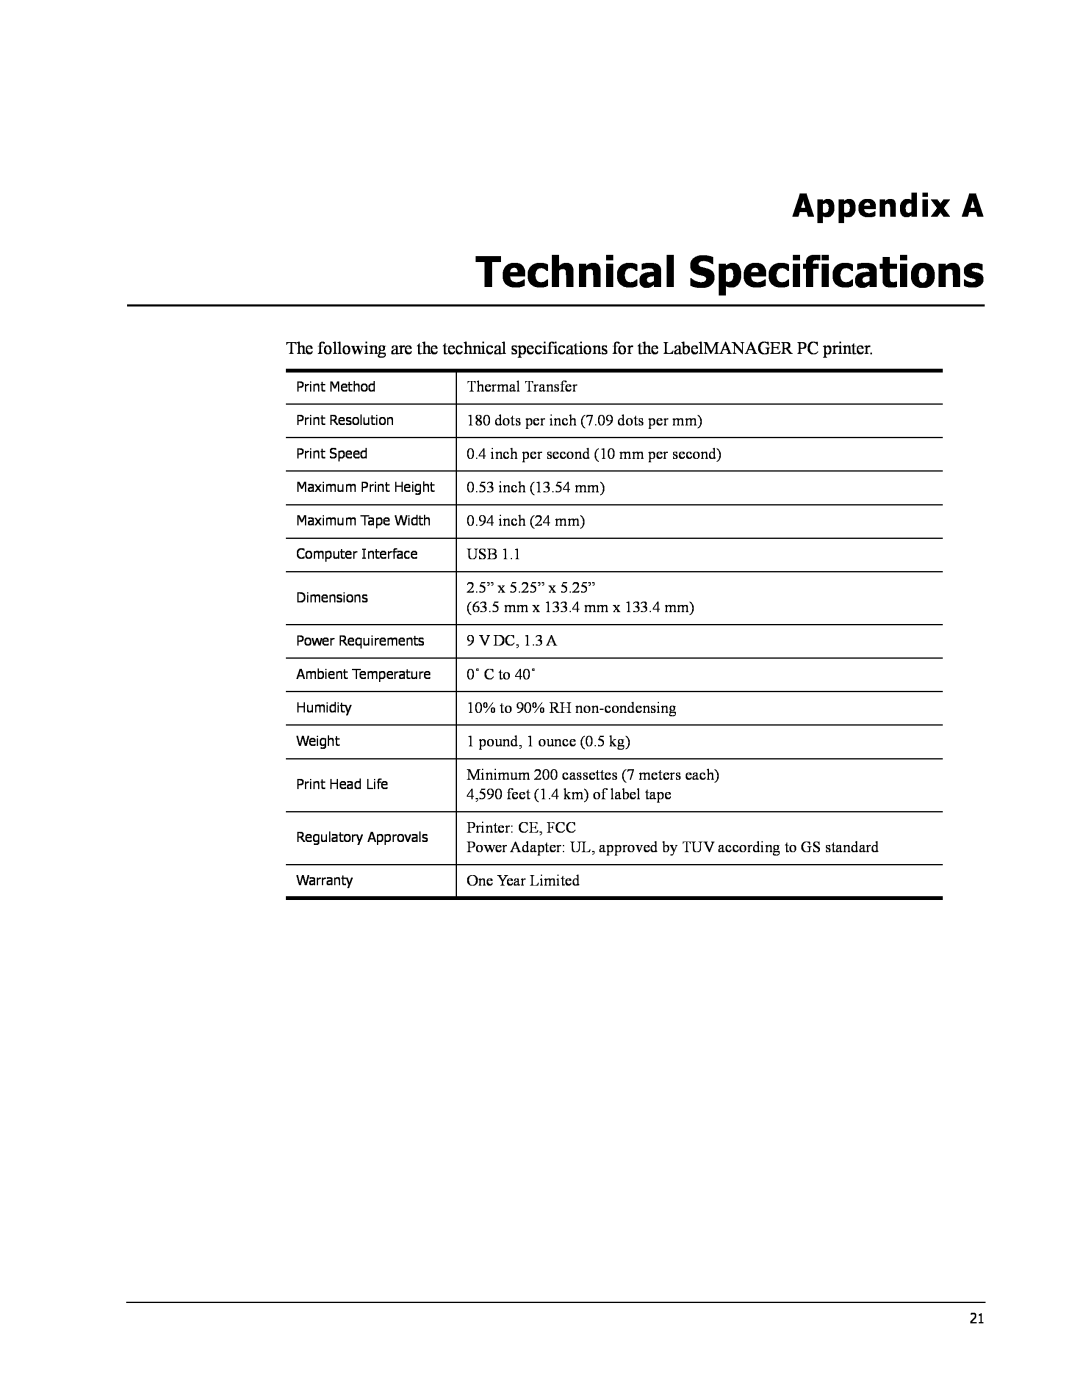 Dymo Label Manager PC manual Technical Specifications, Appendix A 